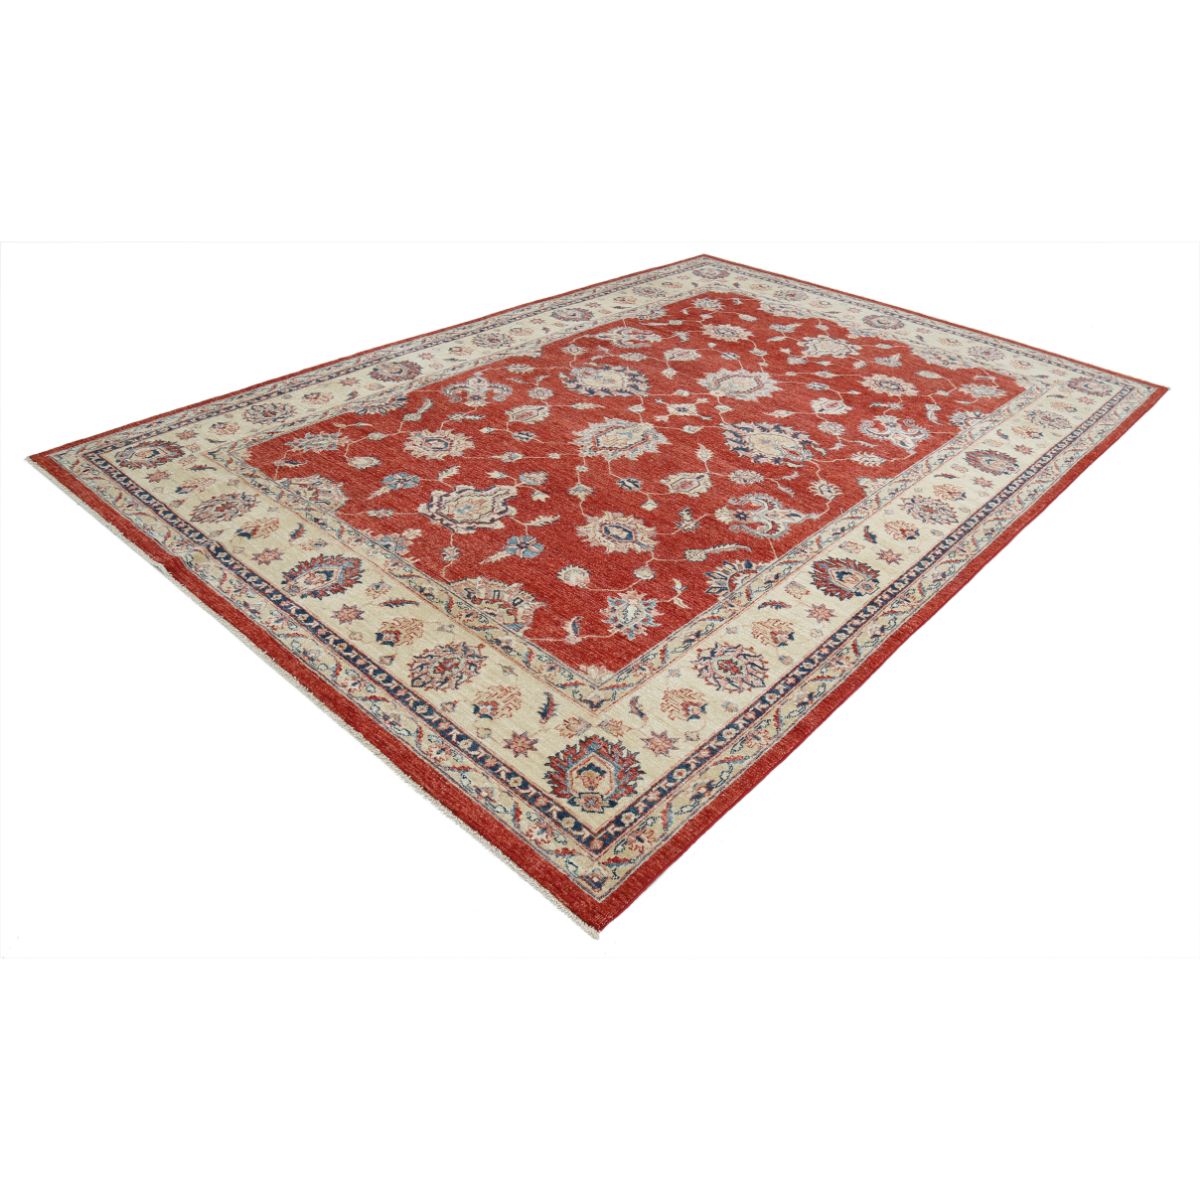 Ziegler 7'11" X 11'3" Wool Hand-Knotted Rug